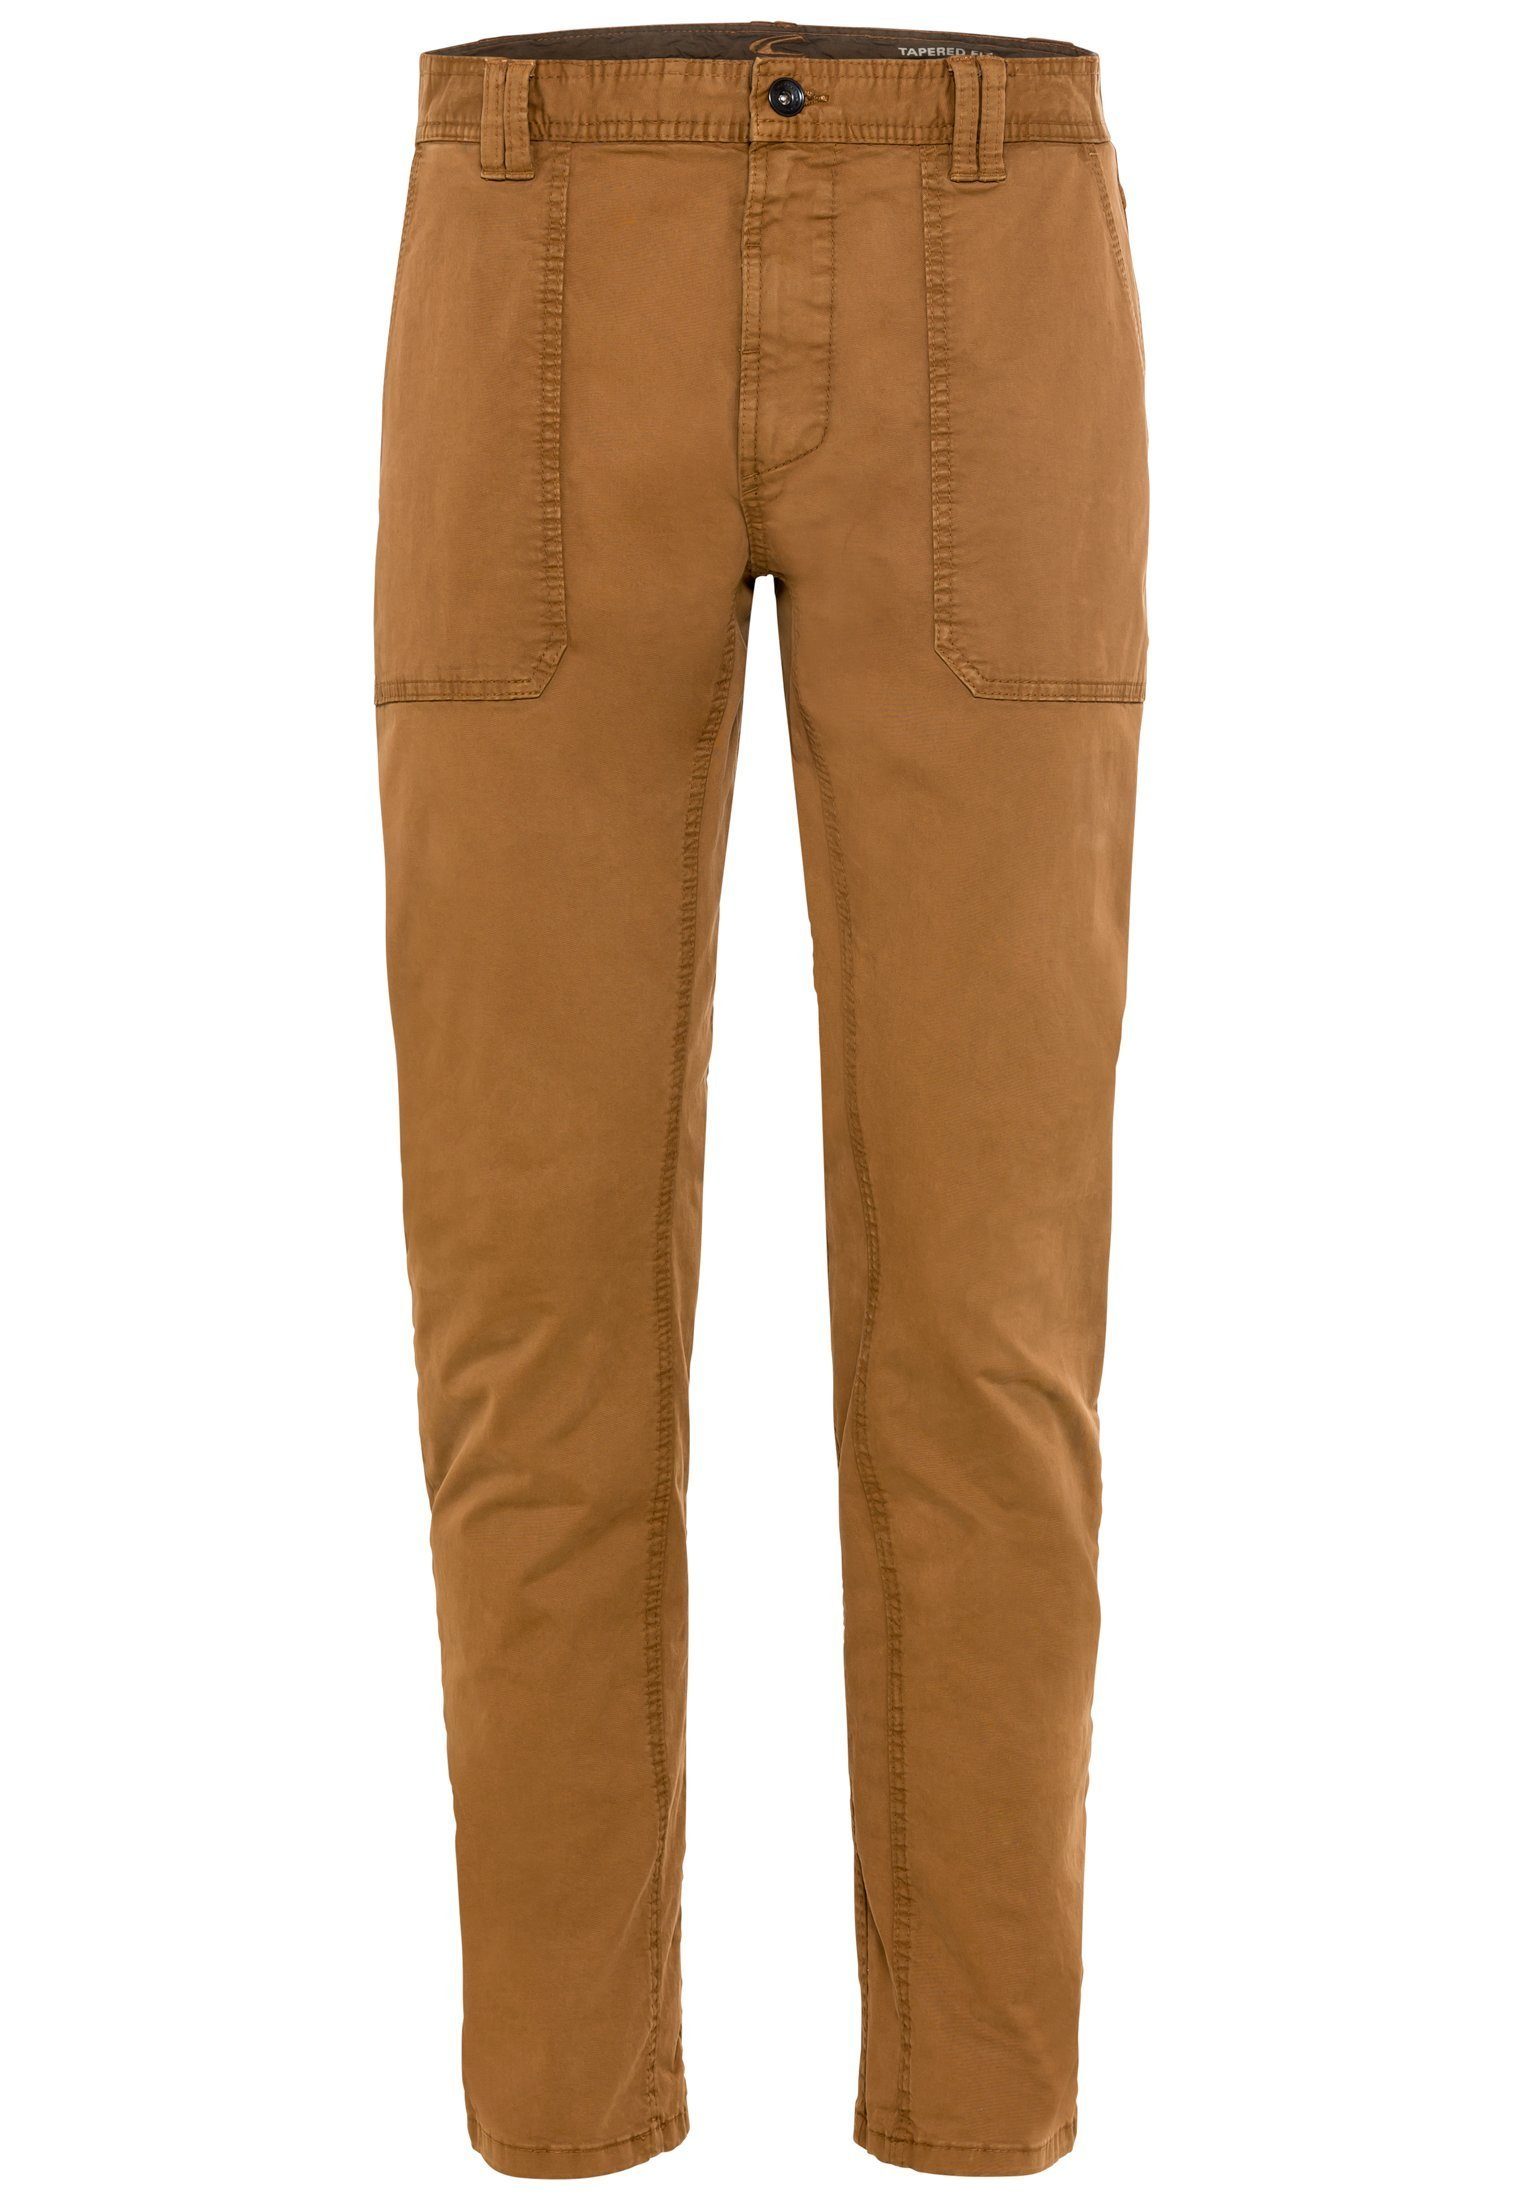 camel active Chinohose Camel Active Herren Worker Chino